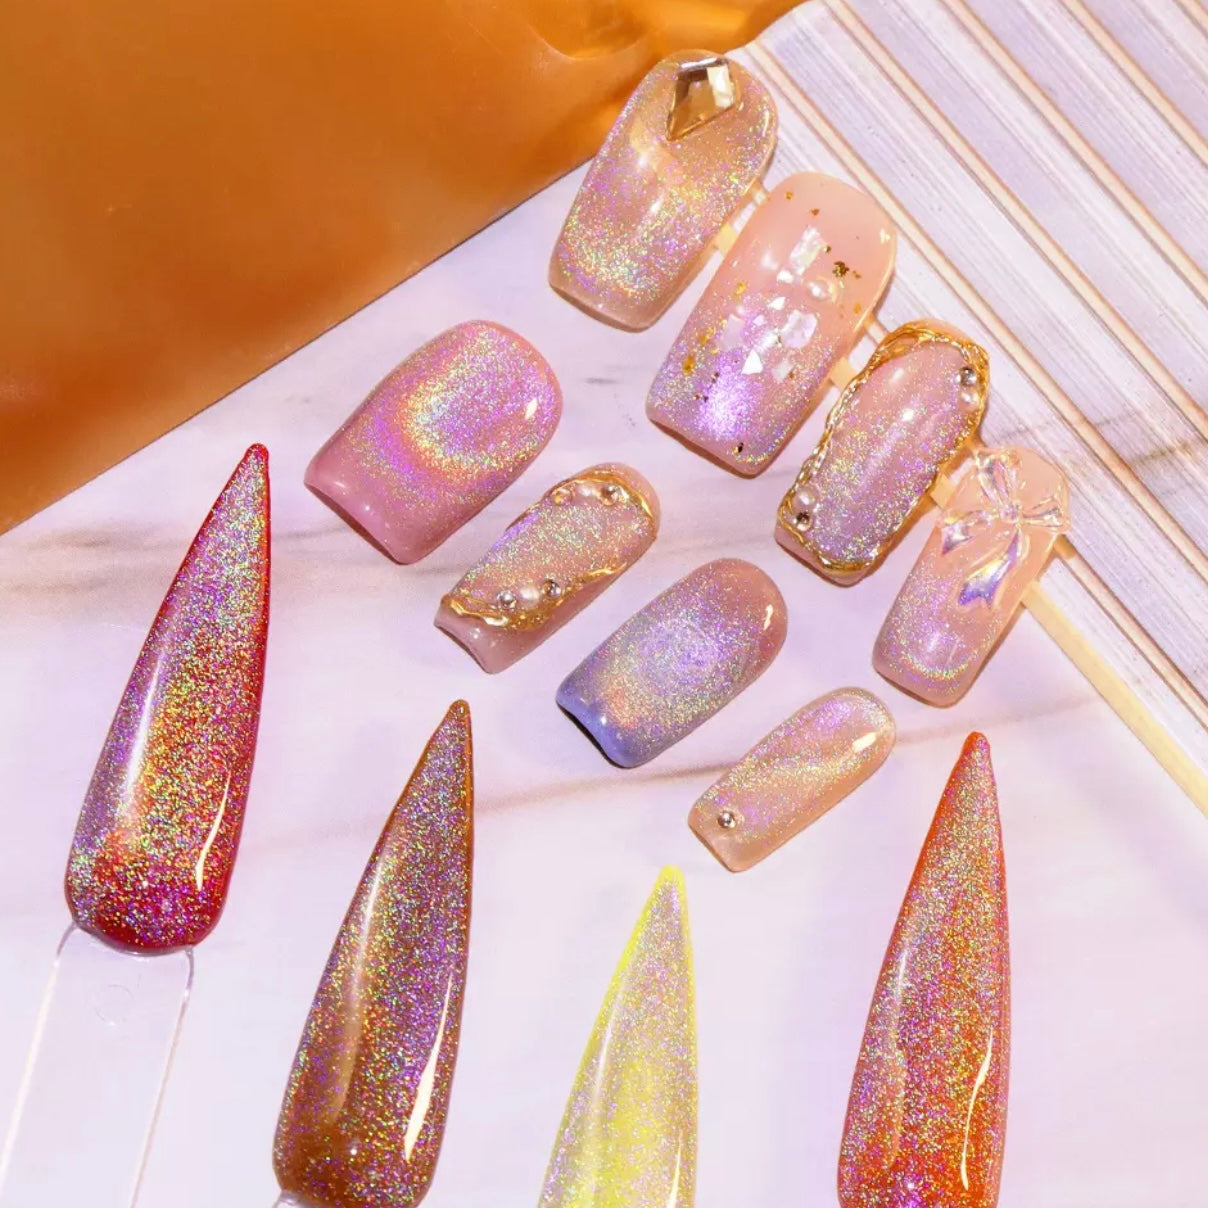 Geometry Nail Design Abstract Line 3D Holographic Nail Art Sticker Rose Gold  | eBay